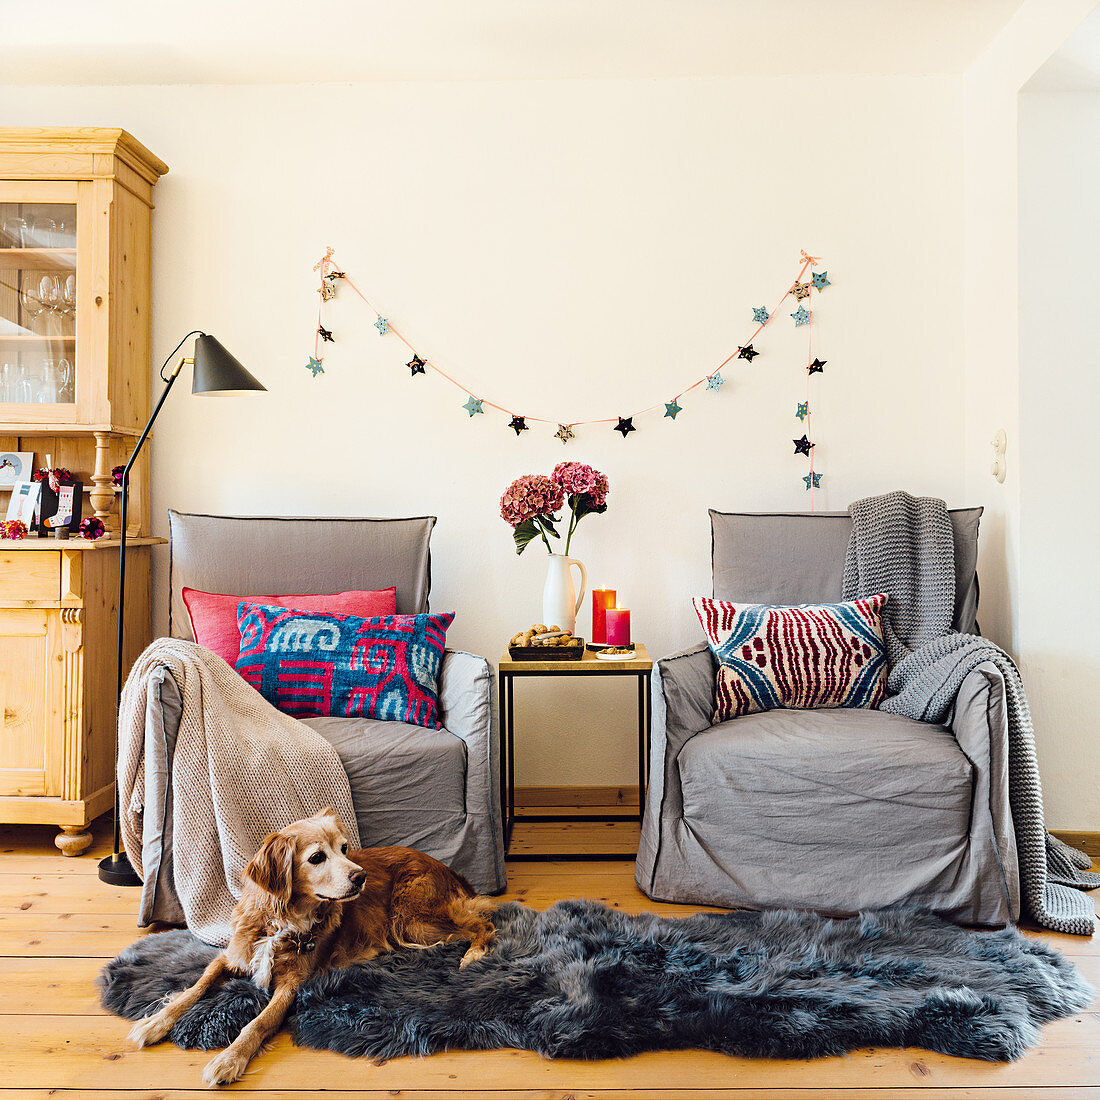 Armchairs and a side table in front of a Christmas garland with a dog lying on a grey animal fur rug